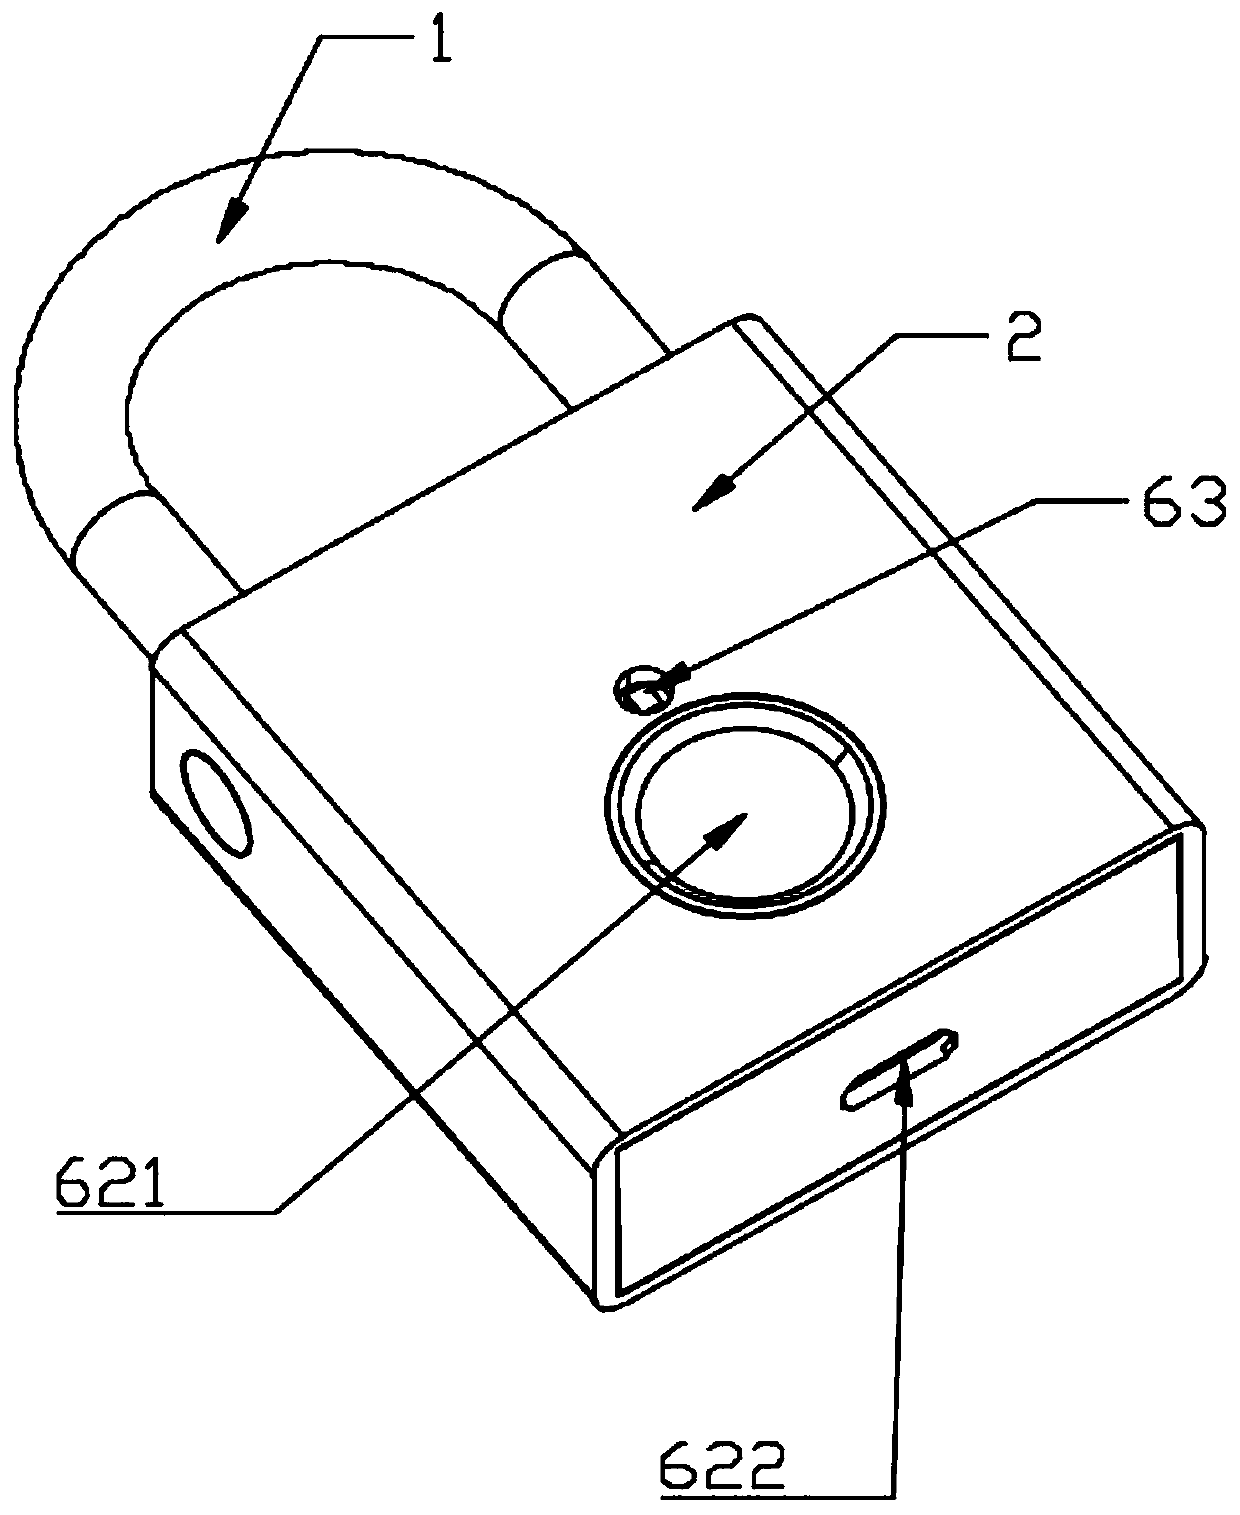 Intelligent padlock capable of being unlocked and driven by memory metal wire